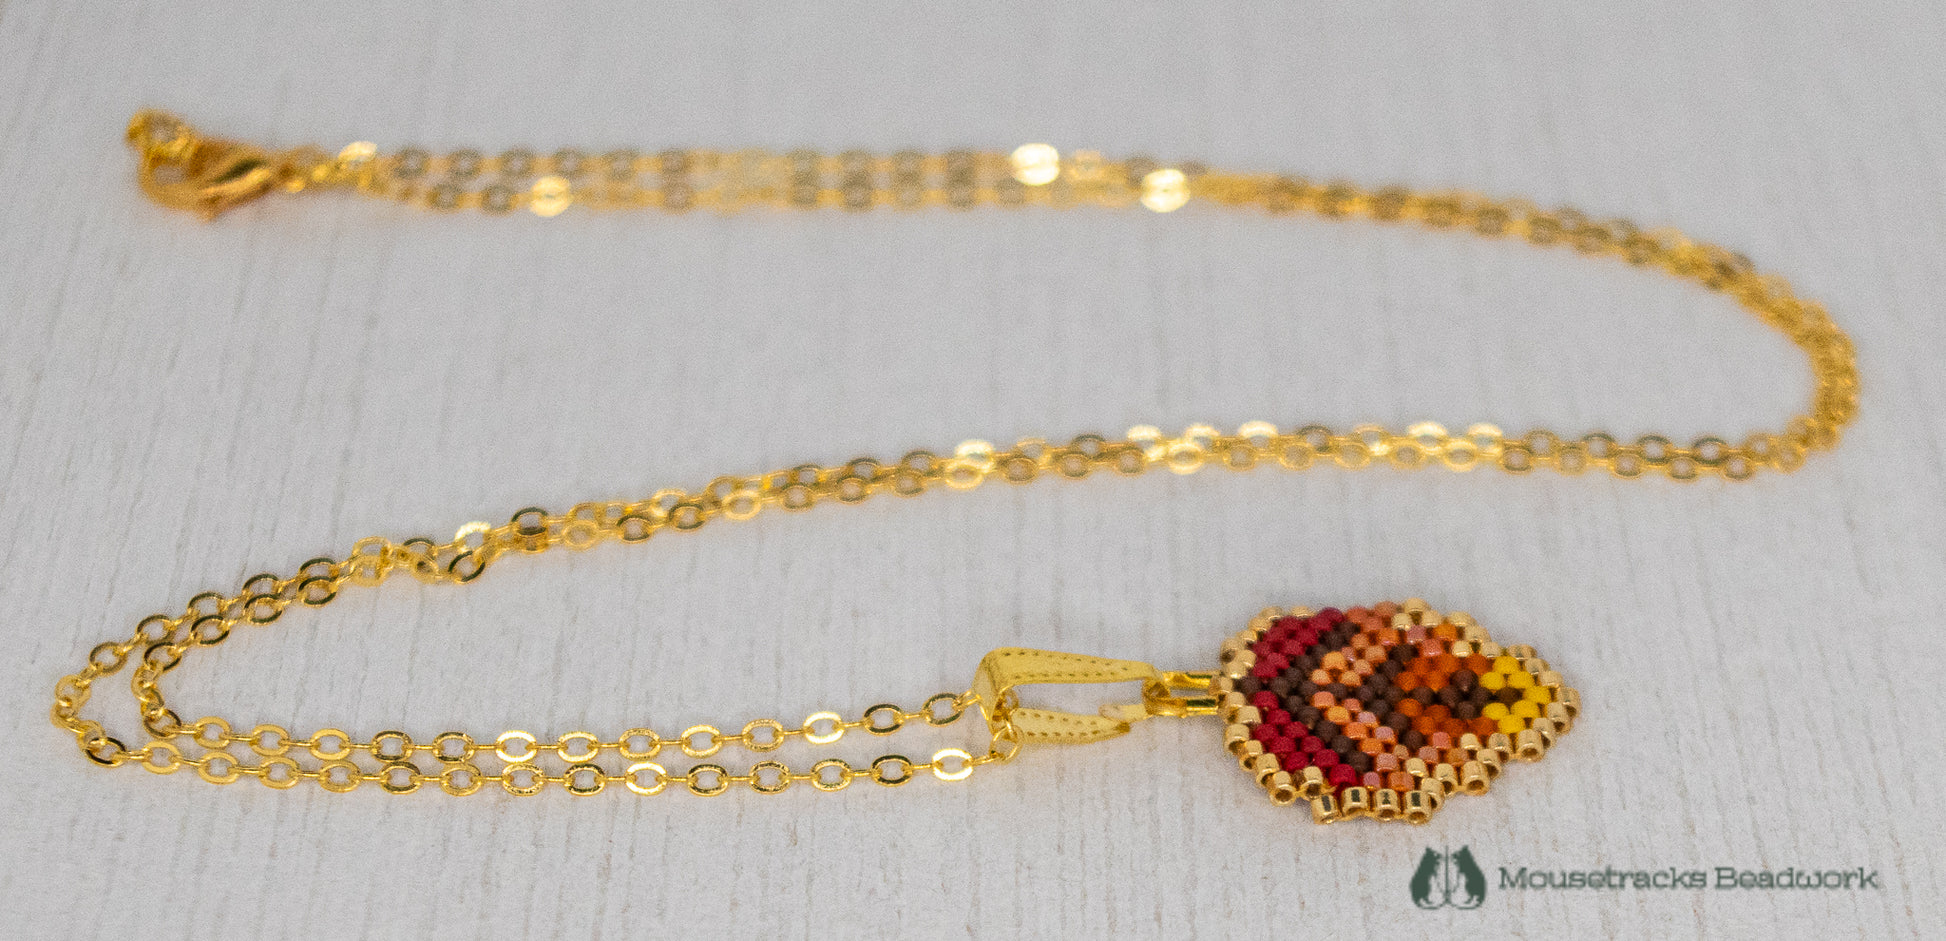 Beaded Red and Gold Autumn Leaf Necklace